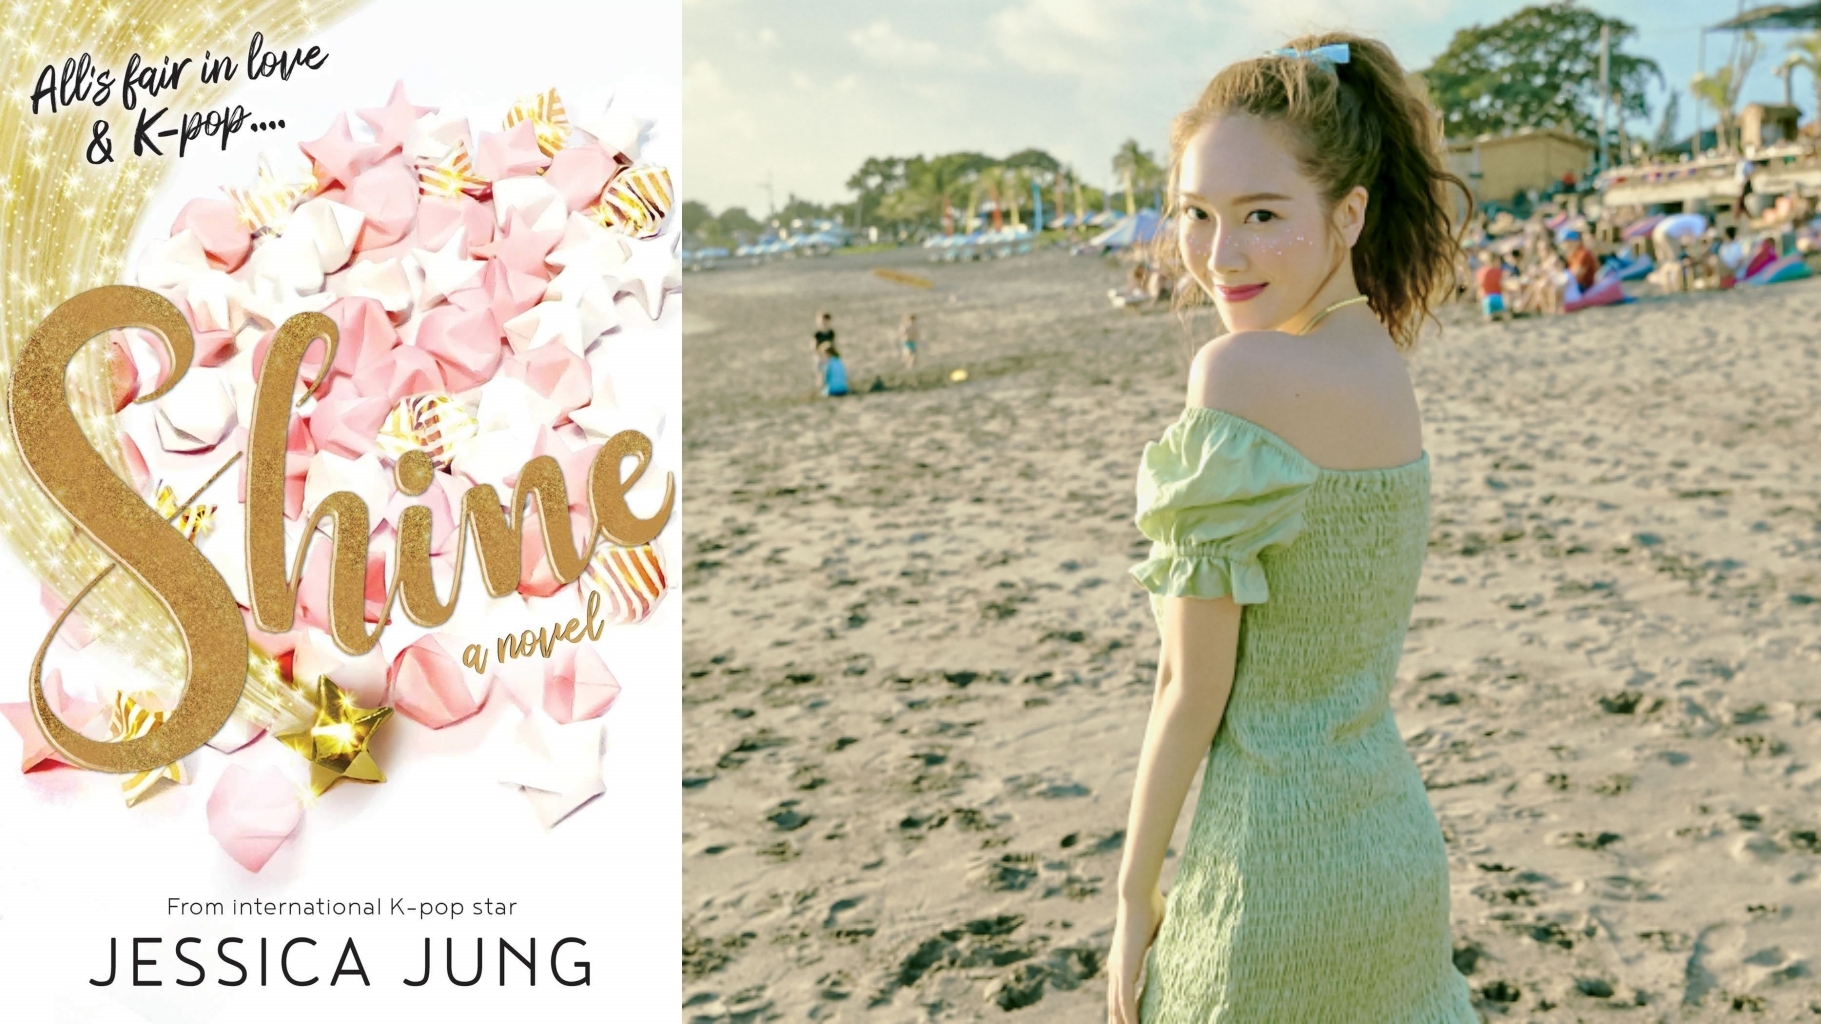 Jessica Jung's First Novel "Shine" Enters New York Times Best Sellers List